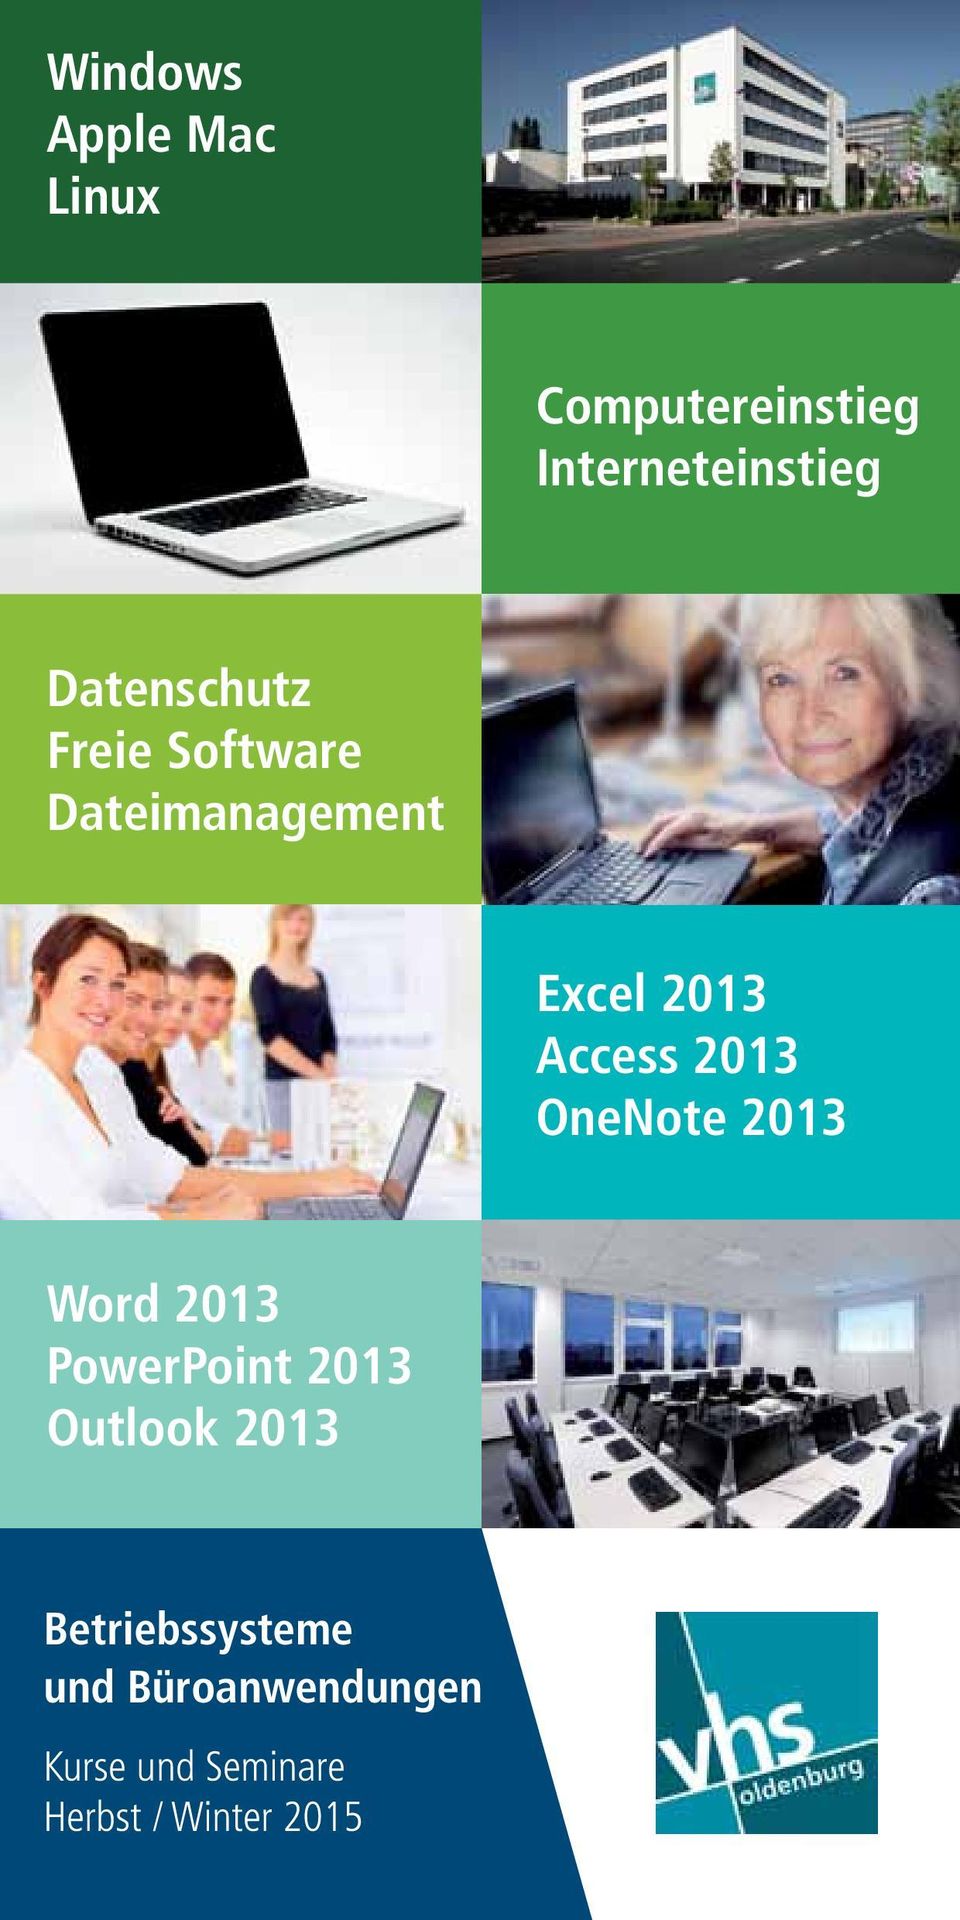 2013 OneNote 2013 Word 2013 PowerPoint 2013 Outlook 2013